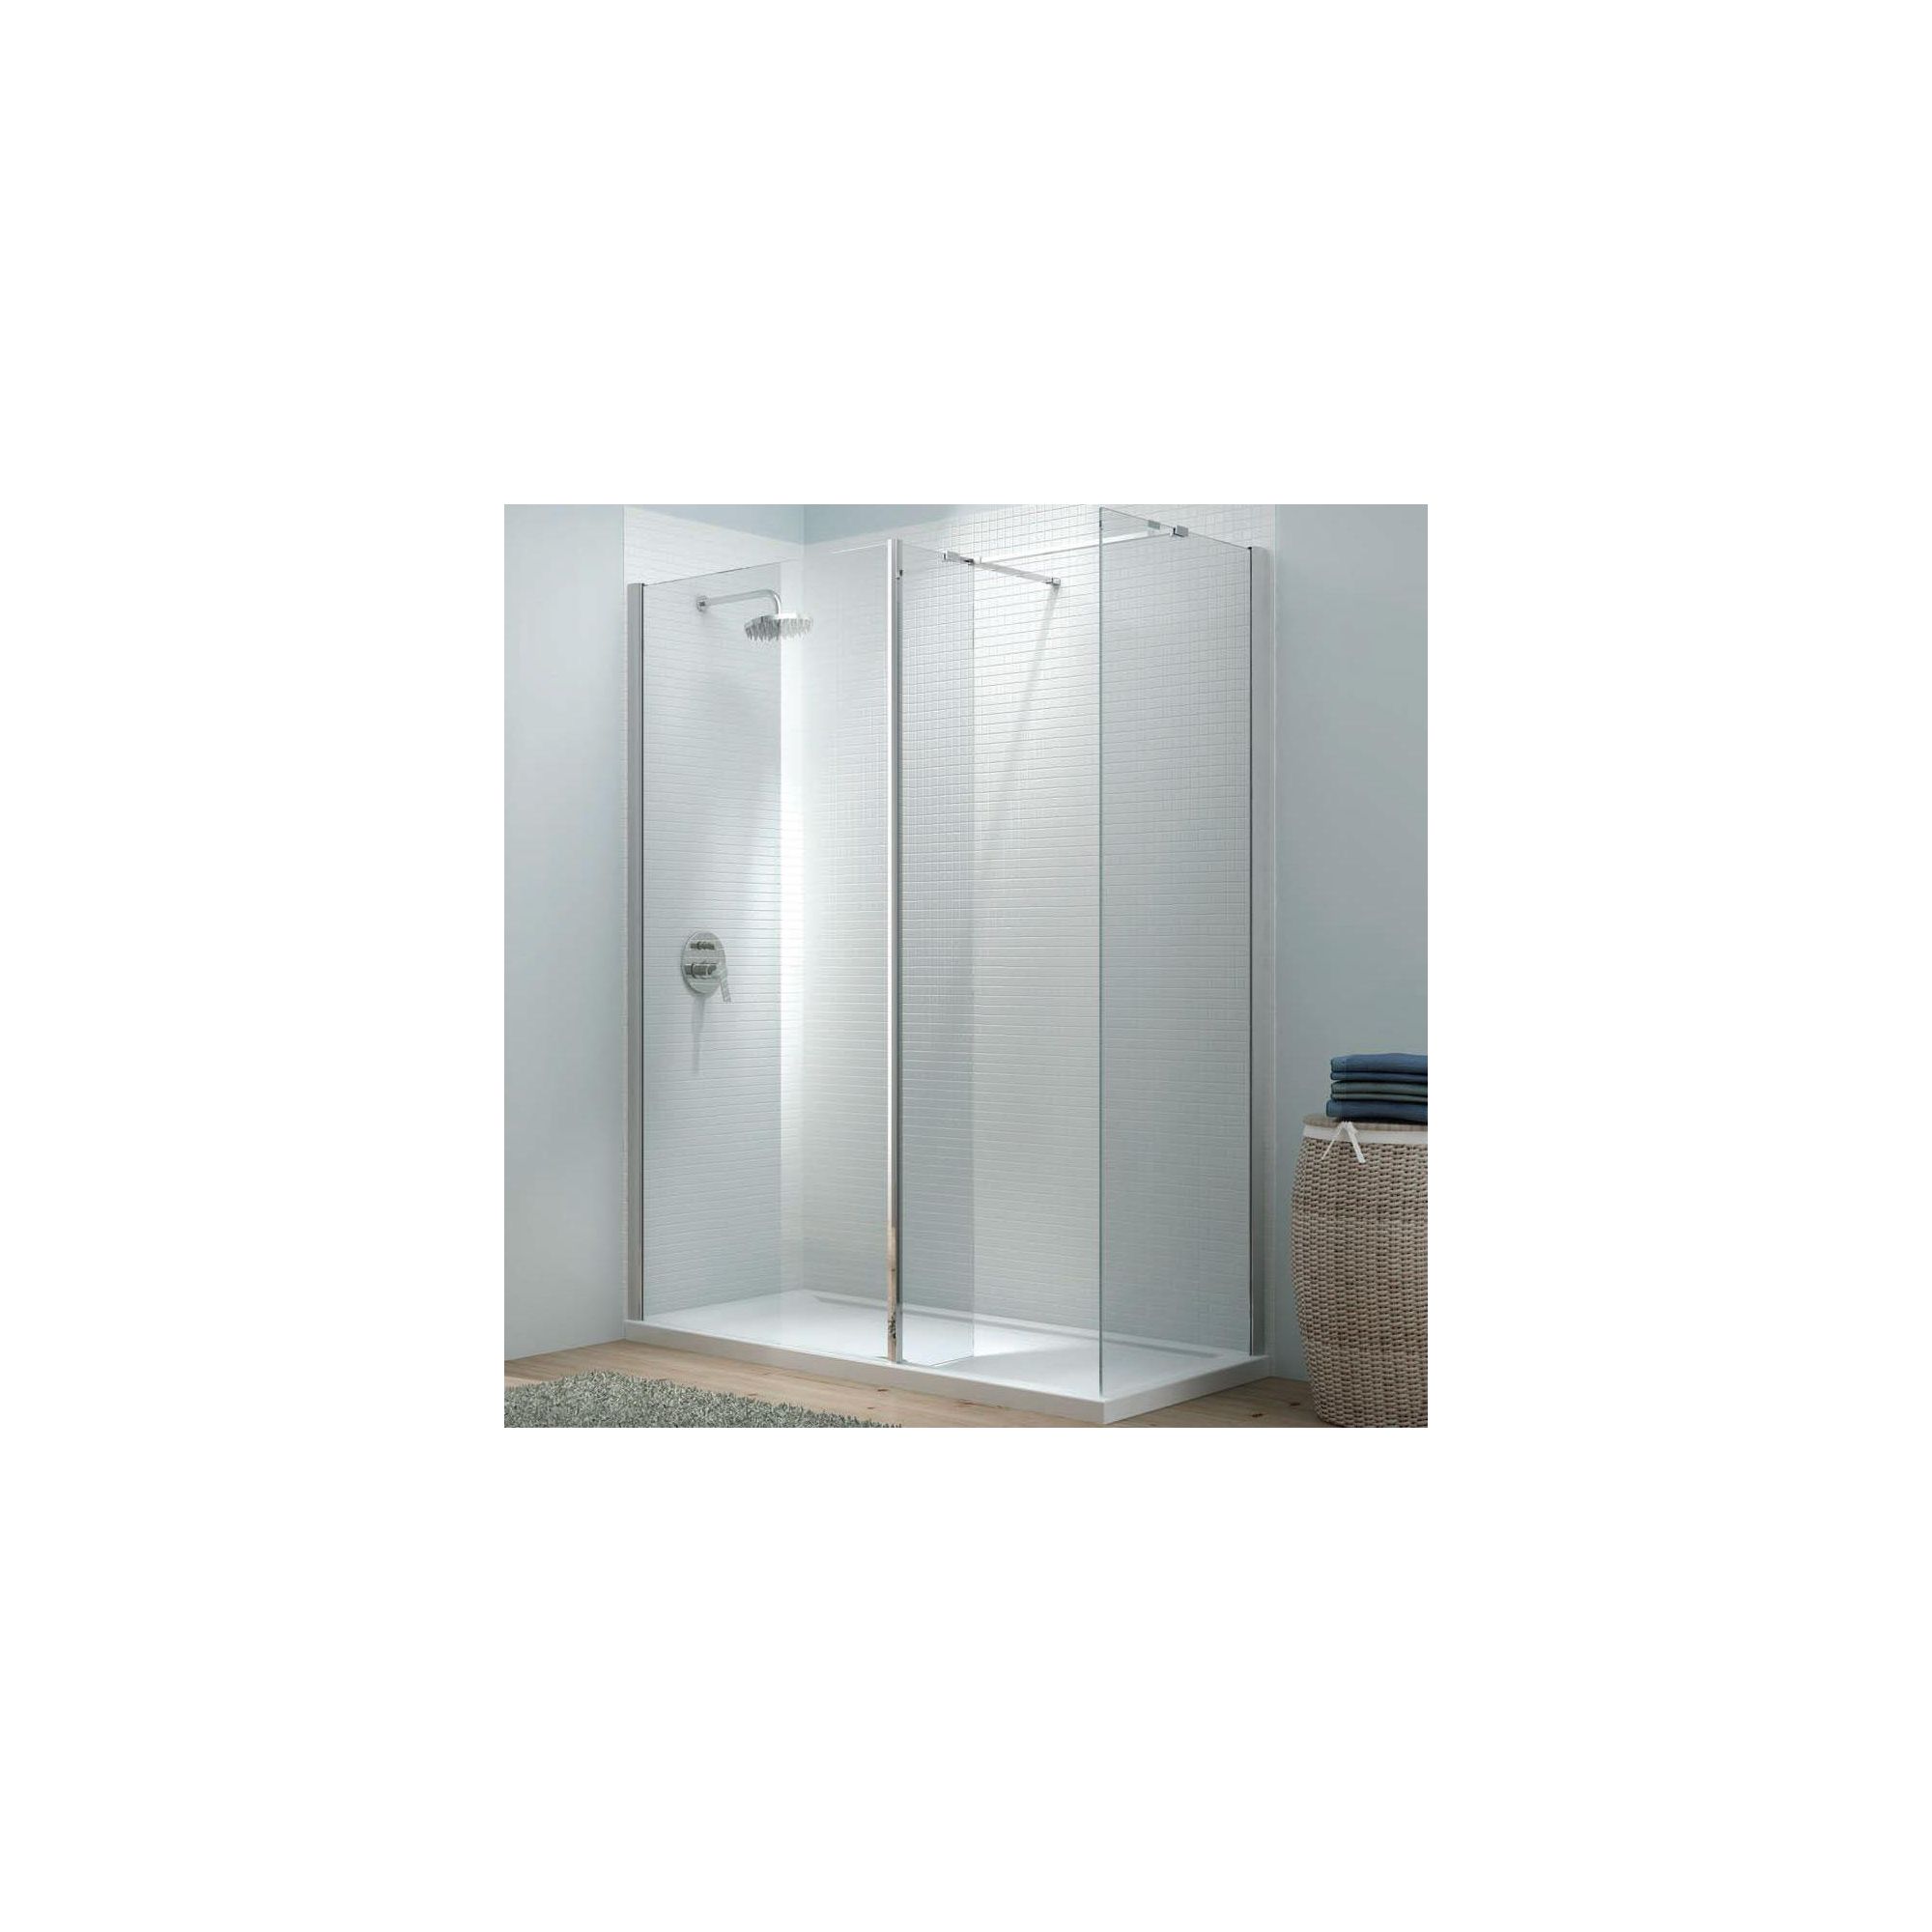 Merlyn Vivid Eight Cube Alcove Walk-In Shower Enclosure, 1500mm x 800mm, Low Profile Tray, 8mm Glass at Tesco Direct